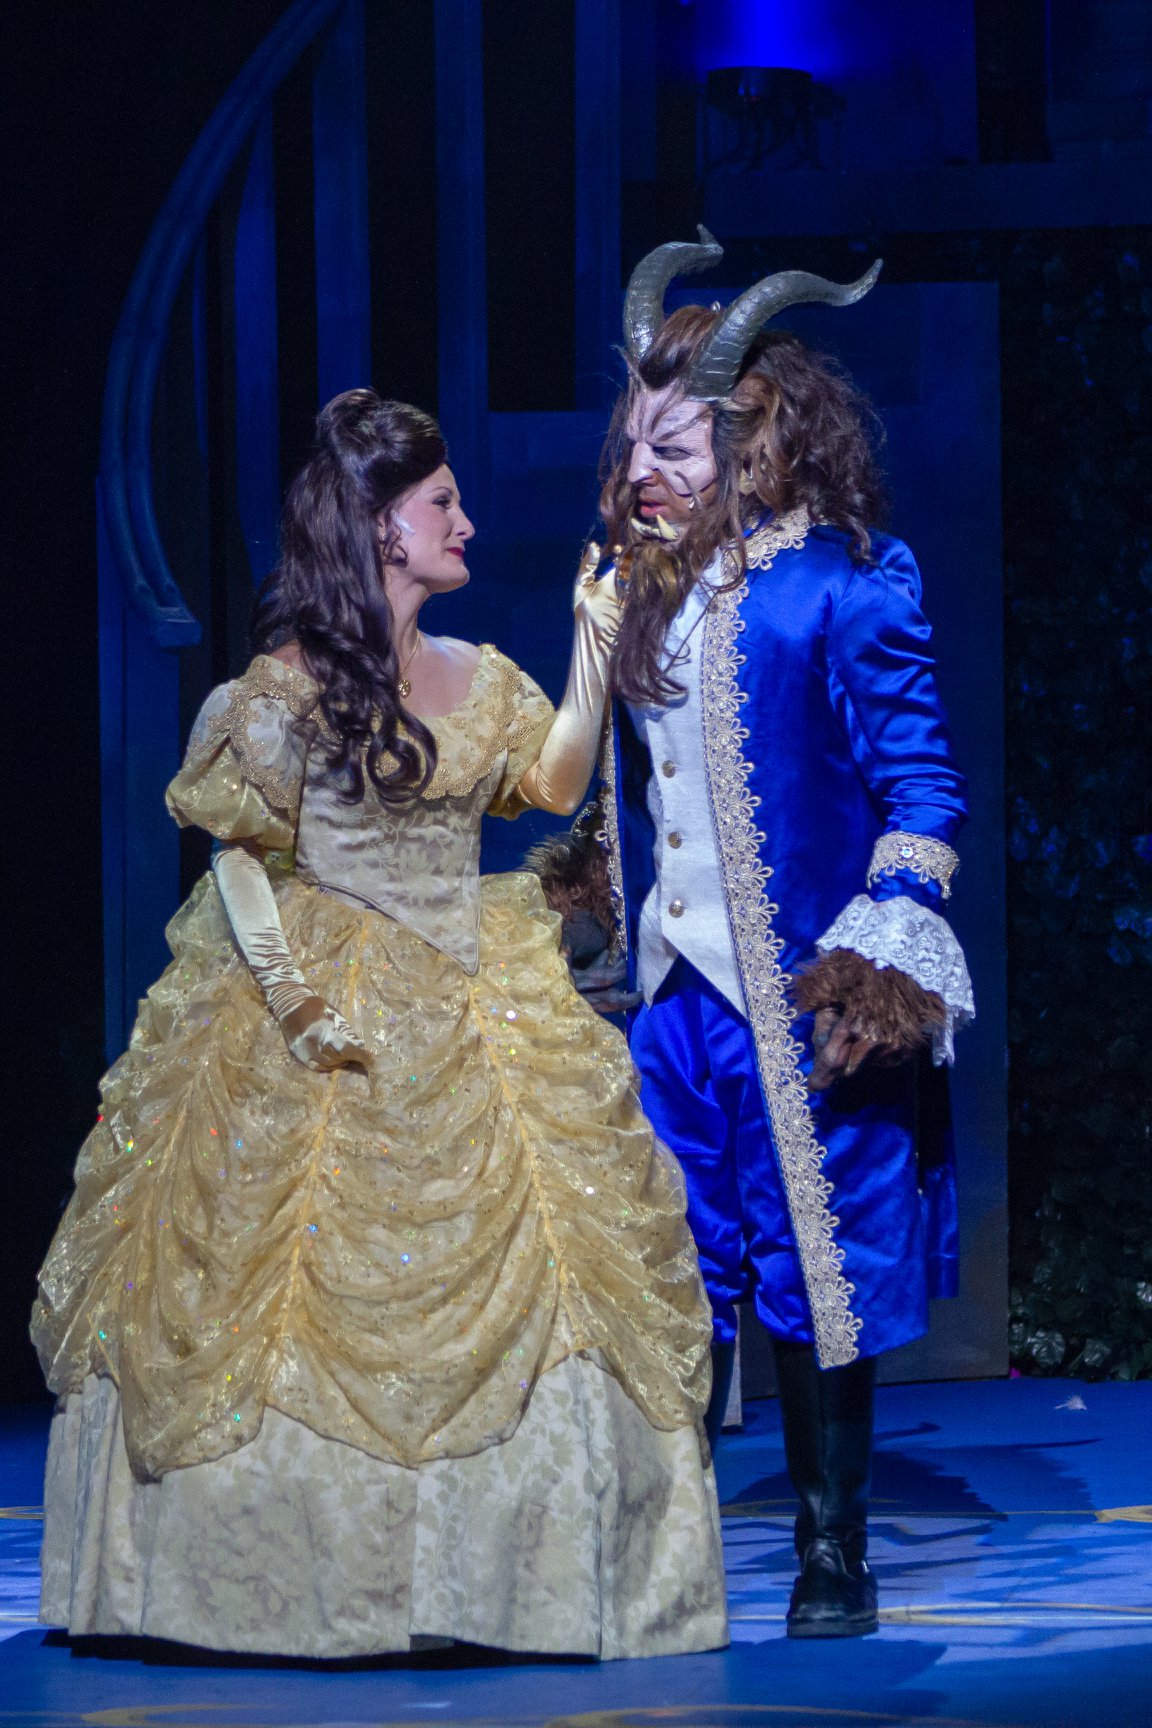 Tale As Old As Time Spellbinding Beauty And The Beast Now Showing At The Palace Theatre Manchester Ink Link